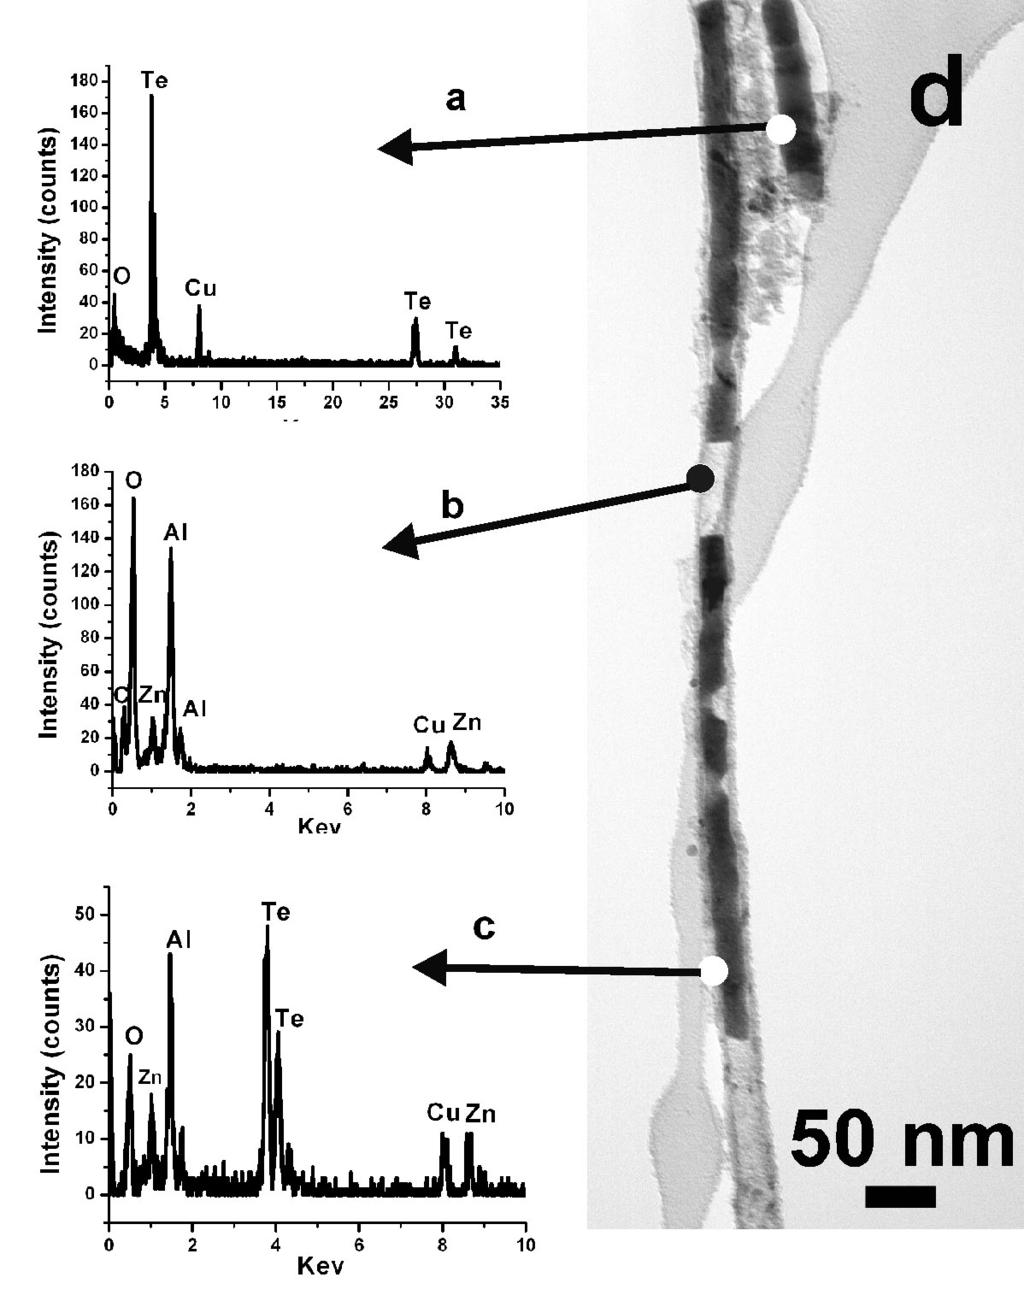 Figure 5.23: Chemical composition analysis of ZnAl 2 O 4 -Te nanowires by EDX spectroscopy: (a) EDX point spectrum of a pure tellurium nanowire measured at the location indicated in (d).